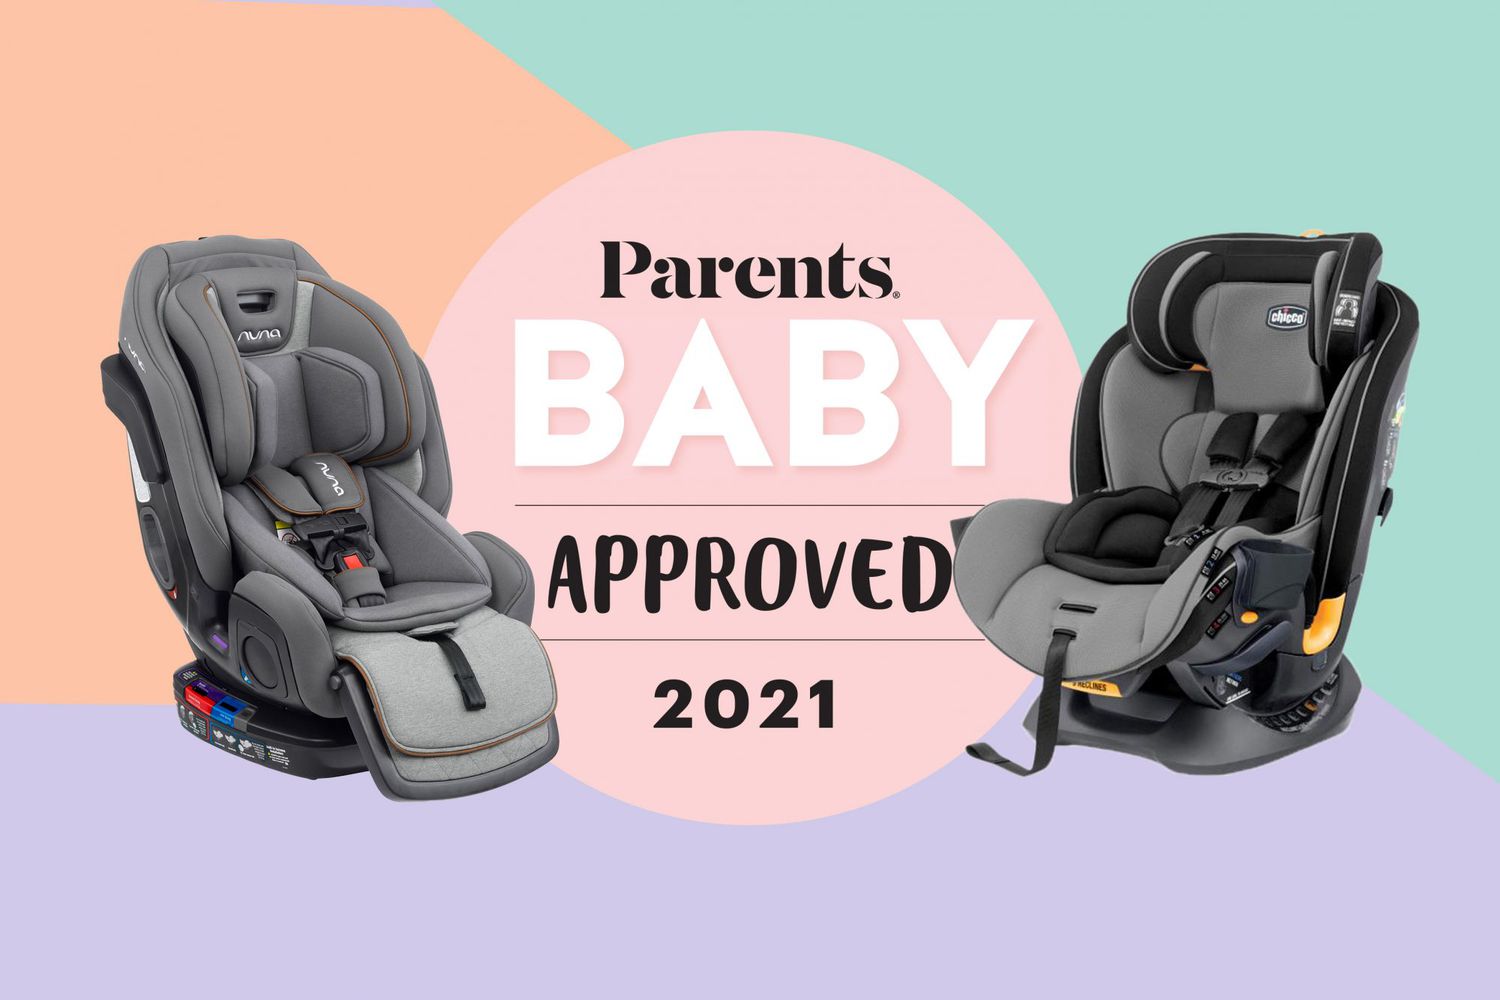 11 Best Convertible Car Seats 2021, Where To Recycle Car Seats 2021